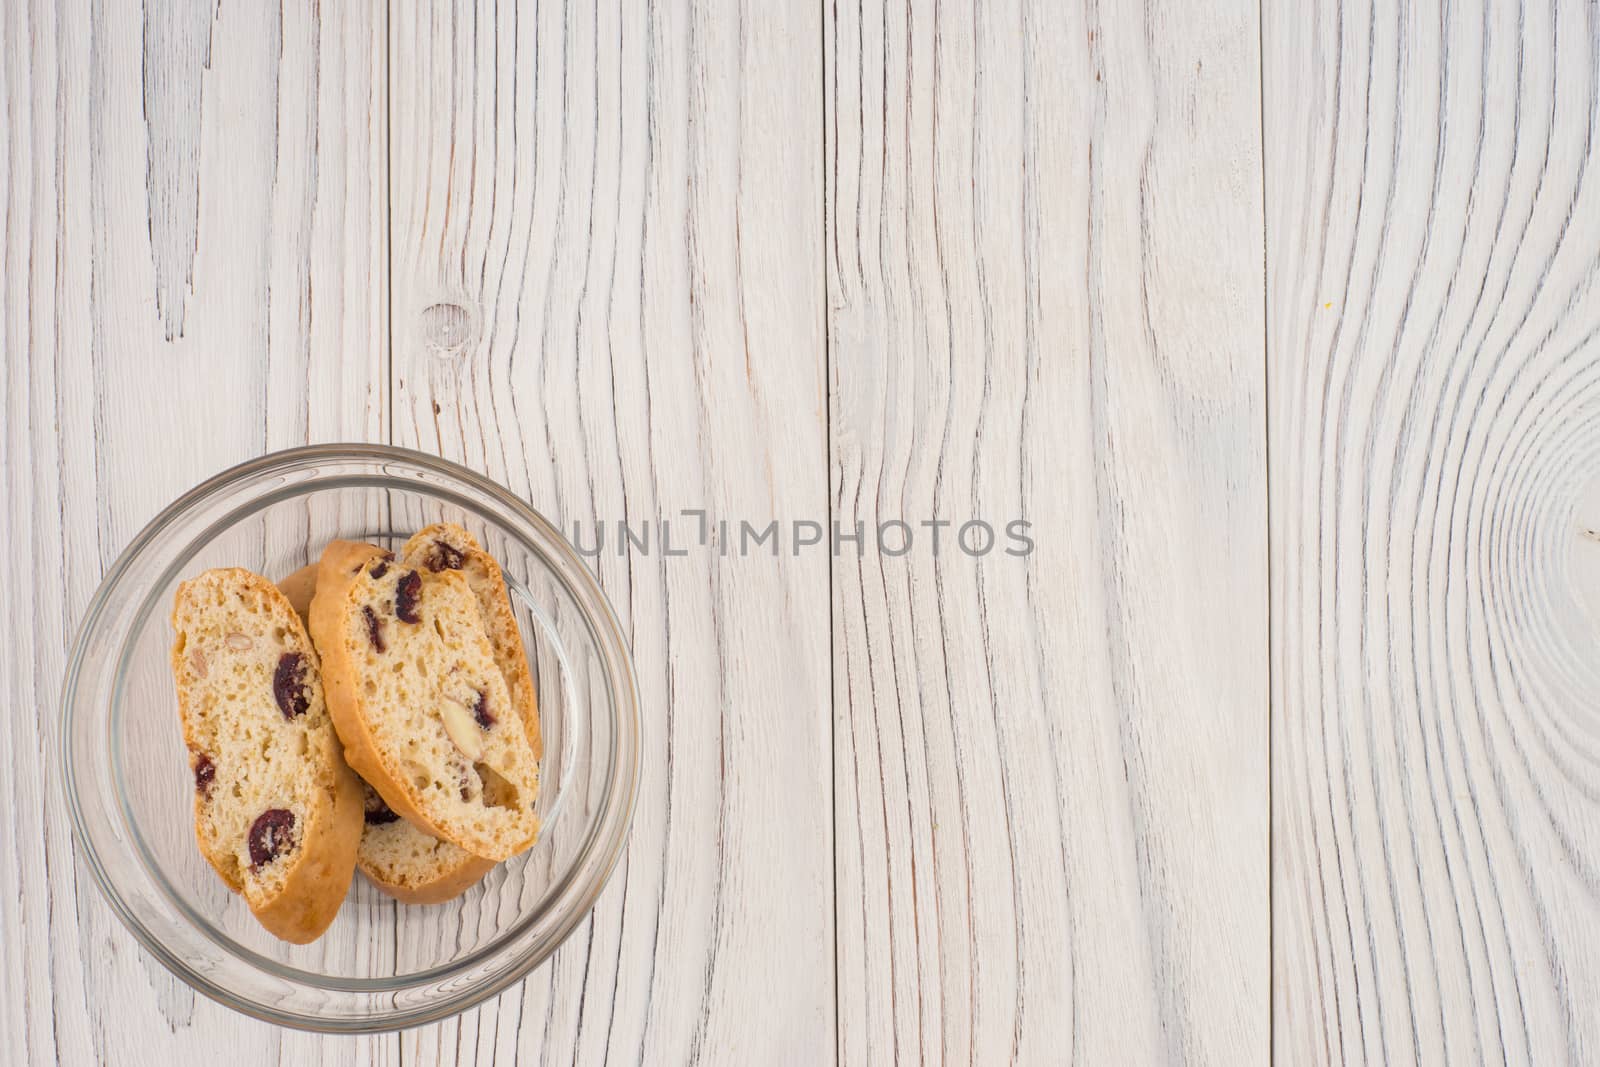 Biscuits in a glass bowl on old white wooden table. by DGolbay